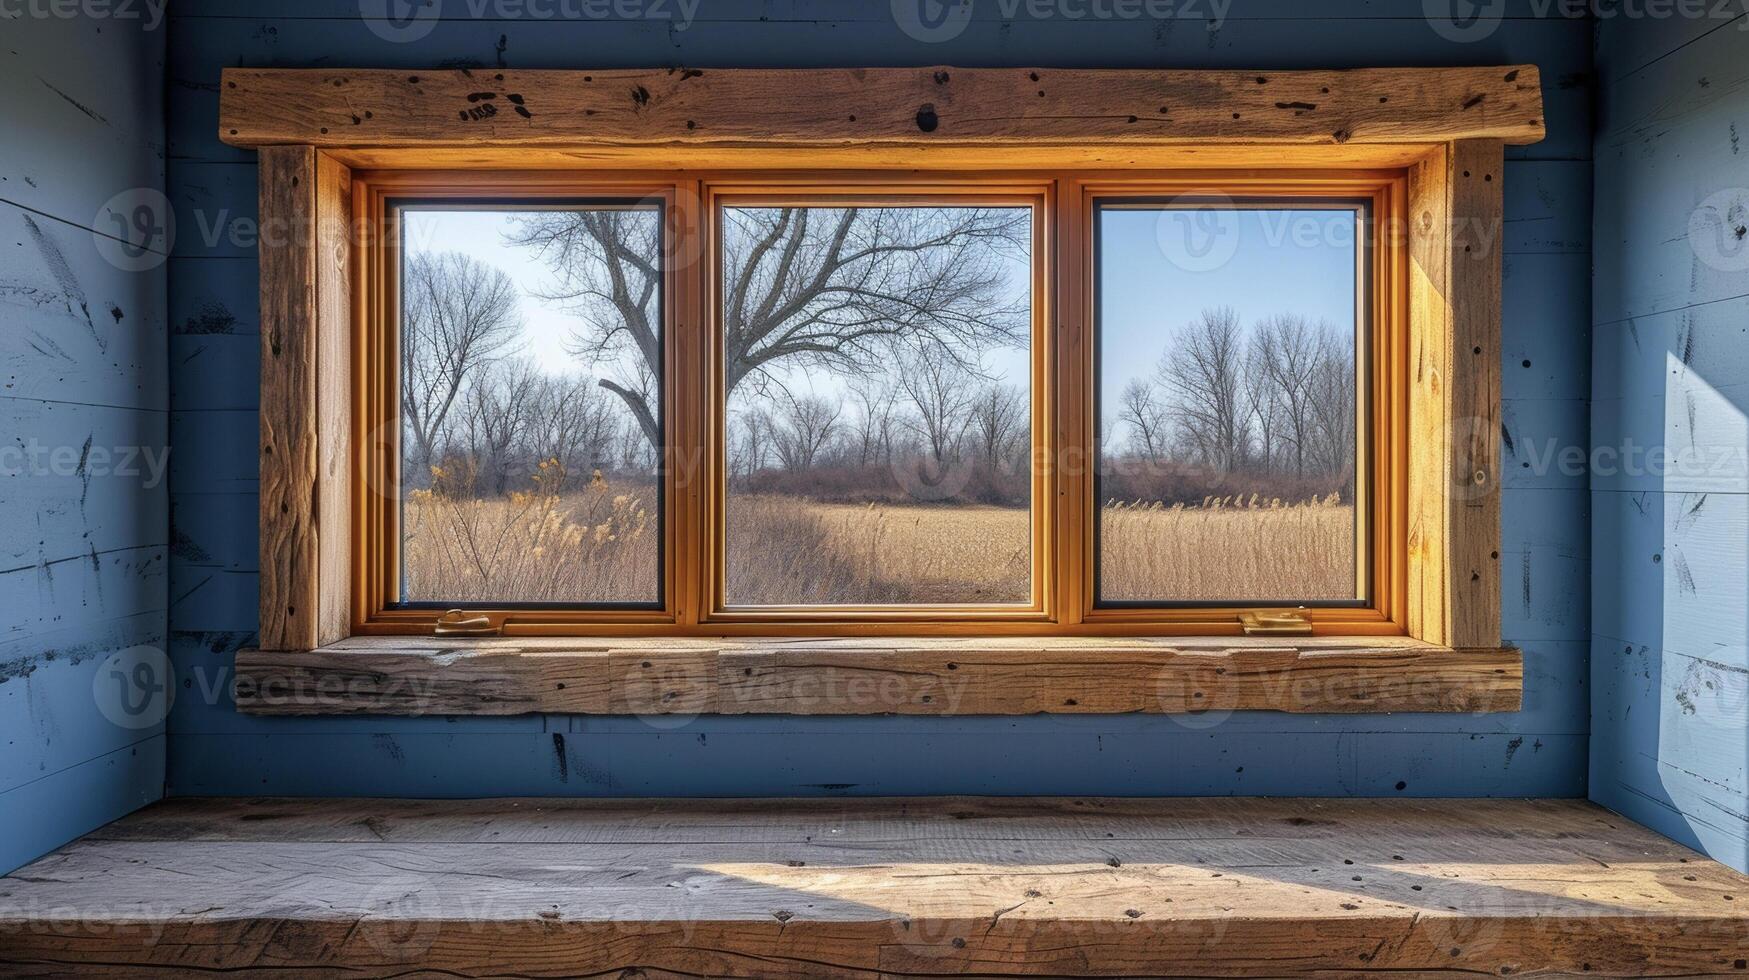 An egress window in a finished bat providing a sense of openness and connection to the outdoors that is often lacking in bat spaces photo